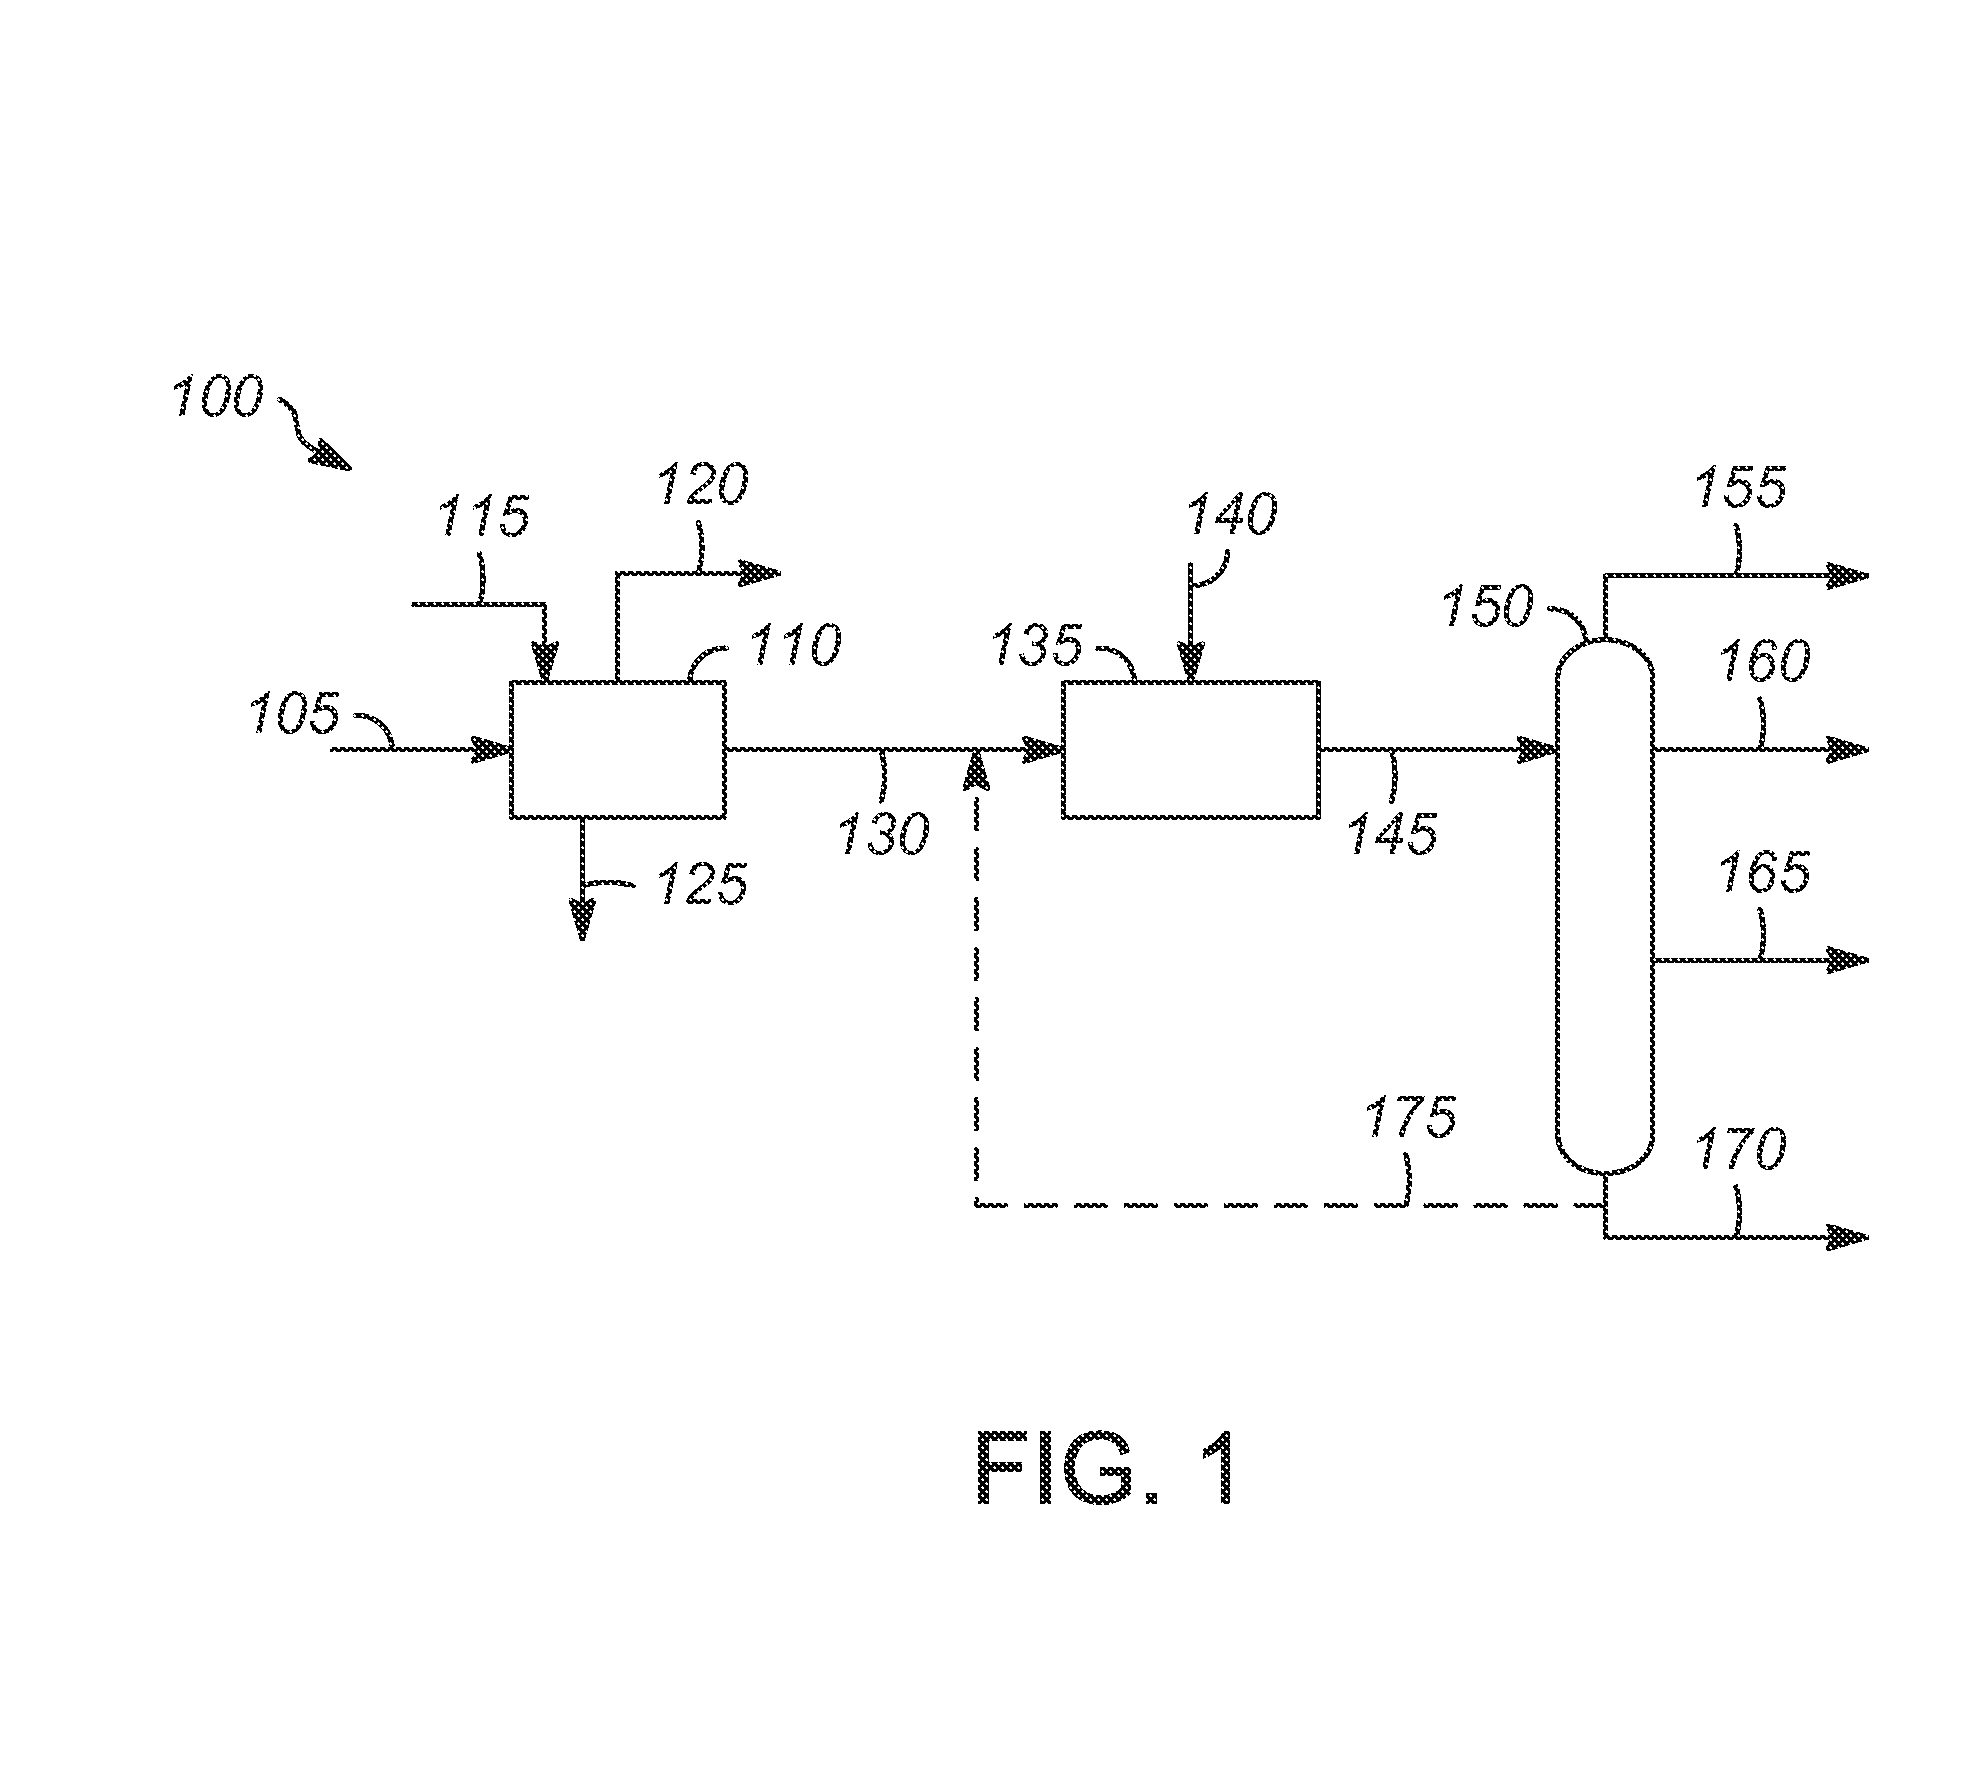 Process for producing diesel fuel and aviation fuel from renewable feedstocks having improving yields